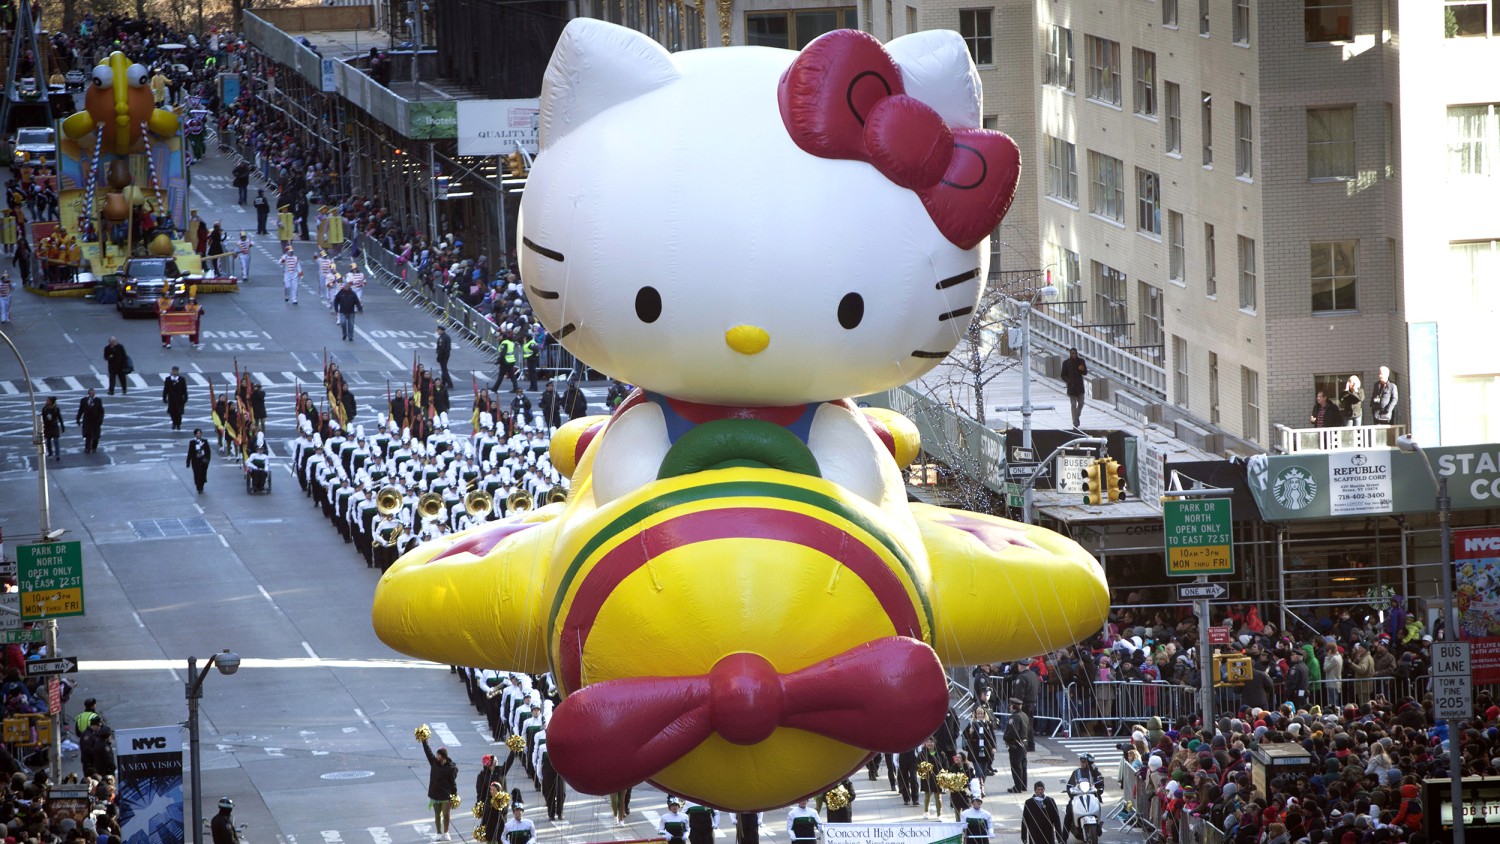 Hello Kitty creators reveal character isn't actually a cat UPDATED